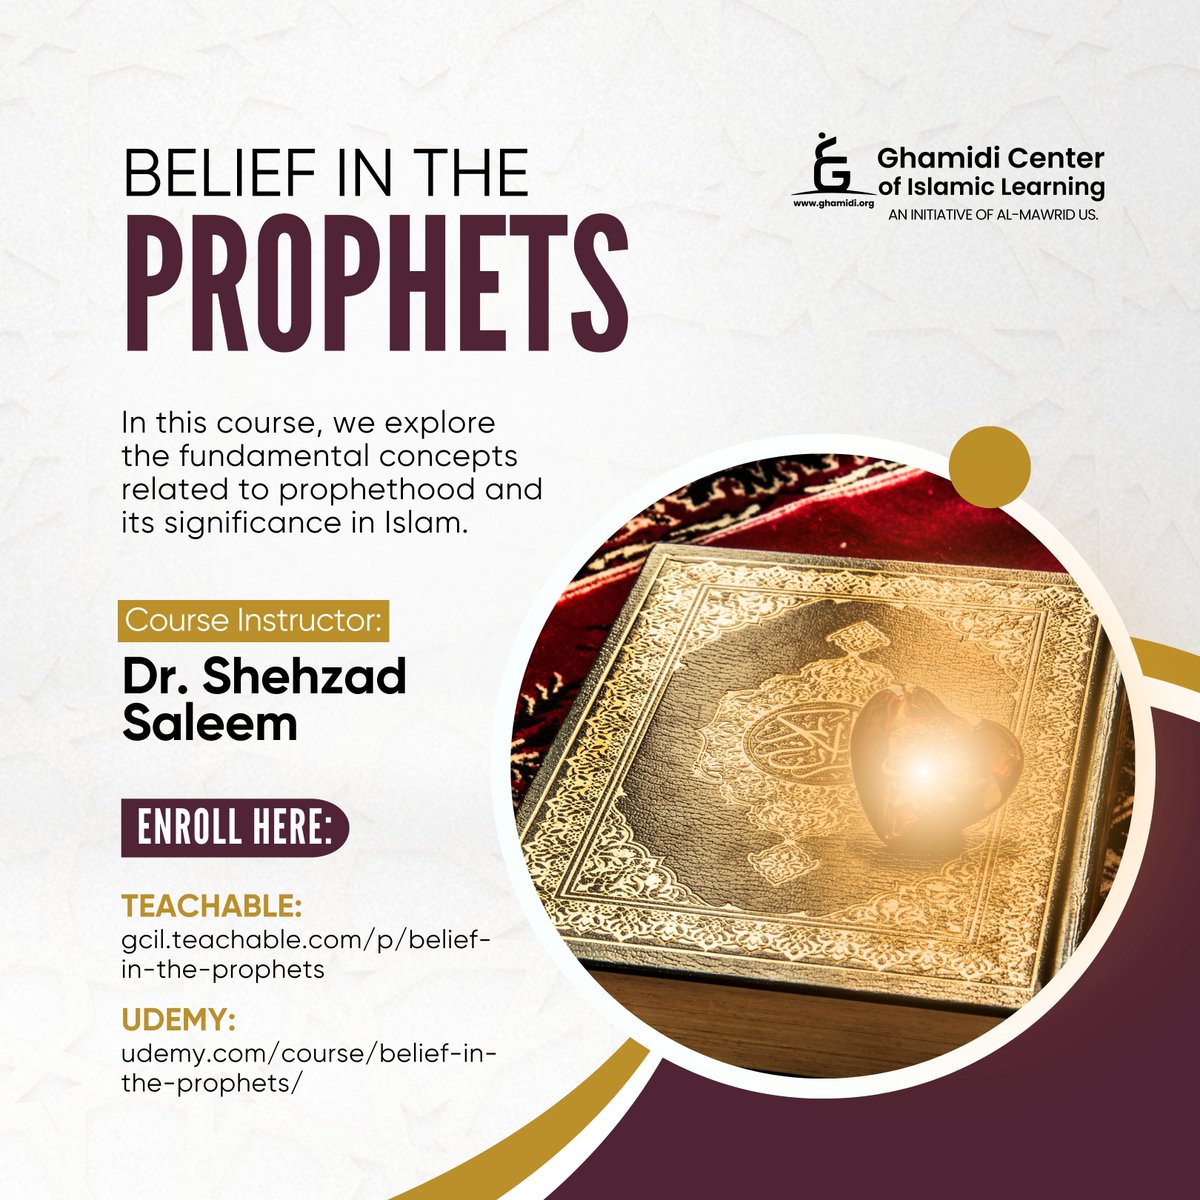 Available now for just $5 on Teachable.  Enroll now to gain a deeper understanding of Belief in the Prophets through Teachable or Udemy: gcil.teachable.com/p/belief-in-th… udemy.com/course/belief-… 

#GCIL #AlMawridUS #teachable #educational #islamiceducation #coursesonline